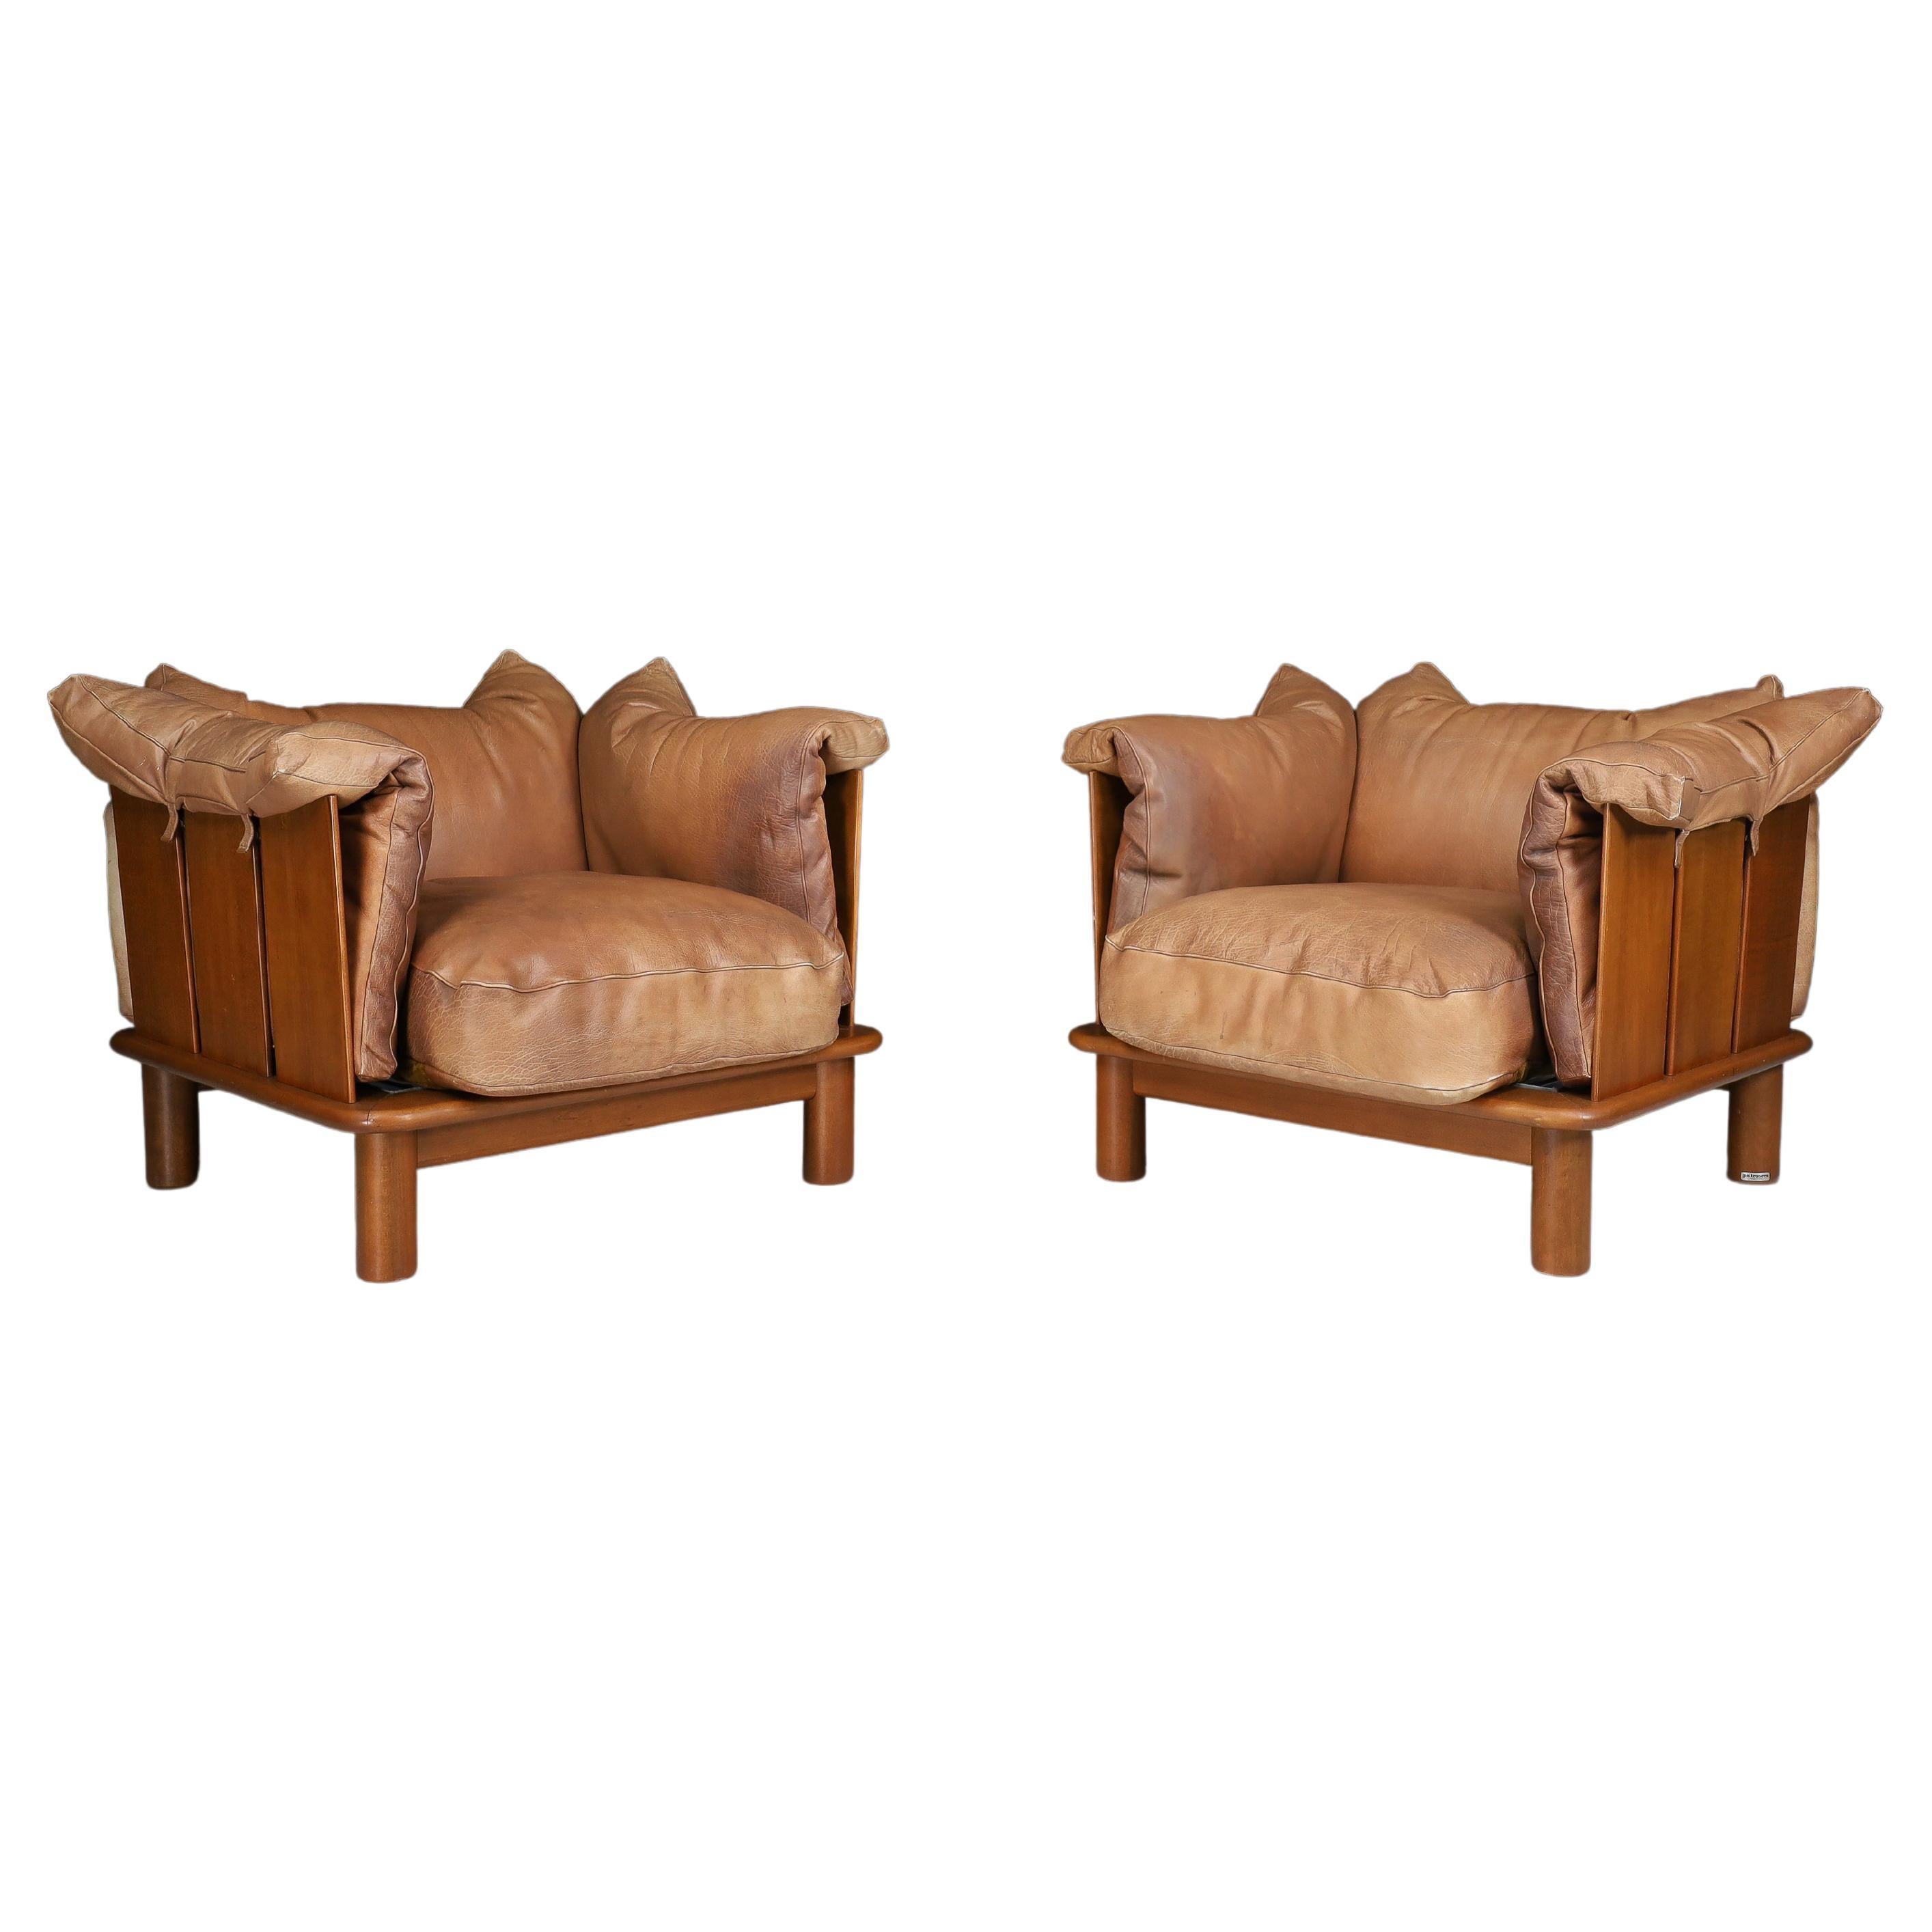 Brown Leather and Walnut Lounge Chairs from De Pas, D'Urbino Lomazzi for Padova